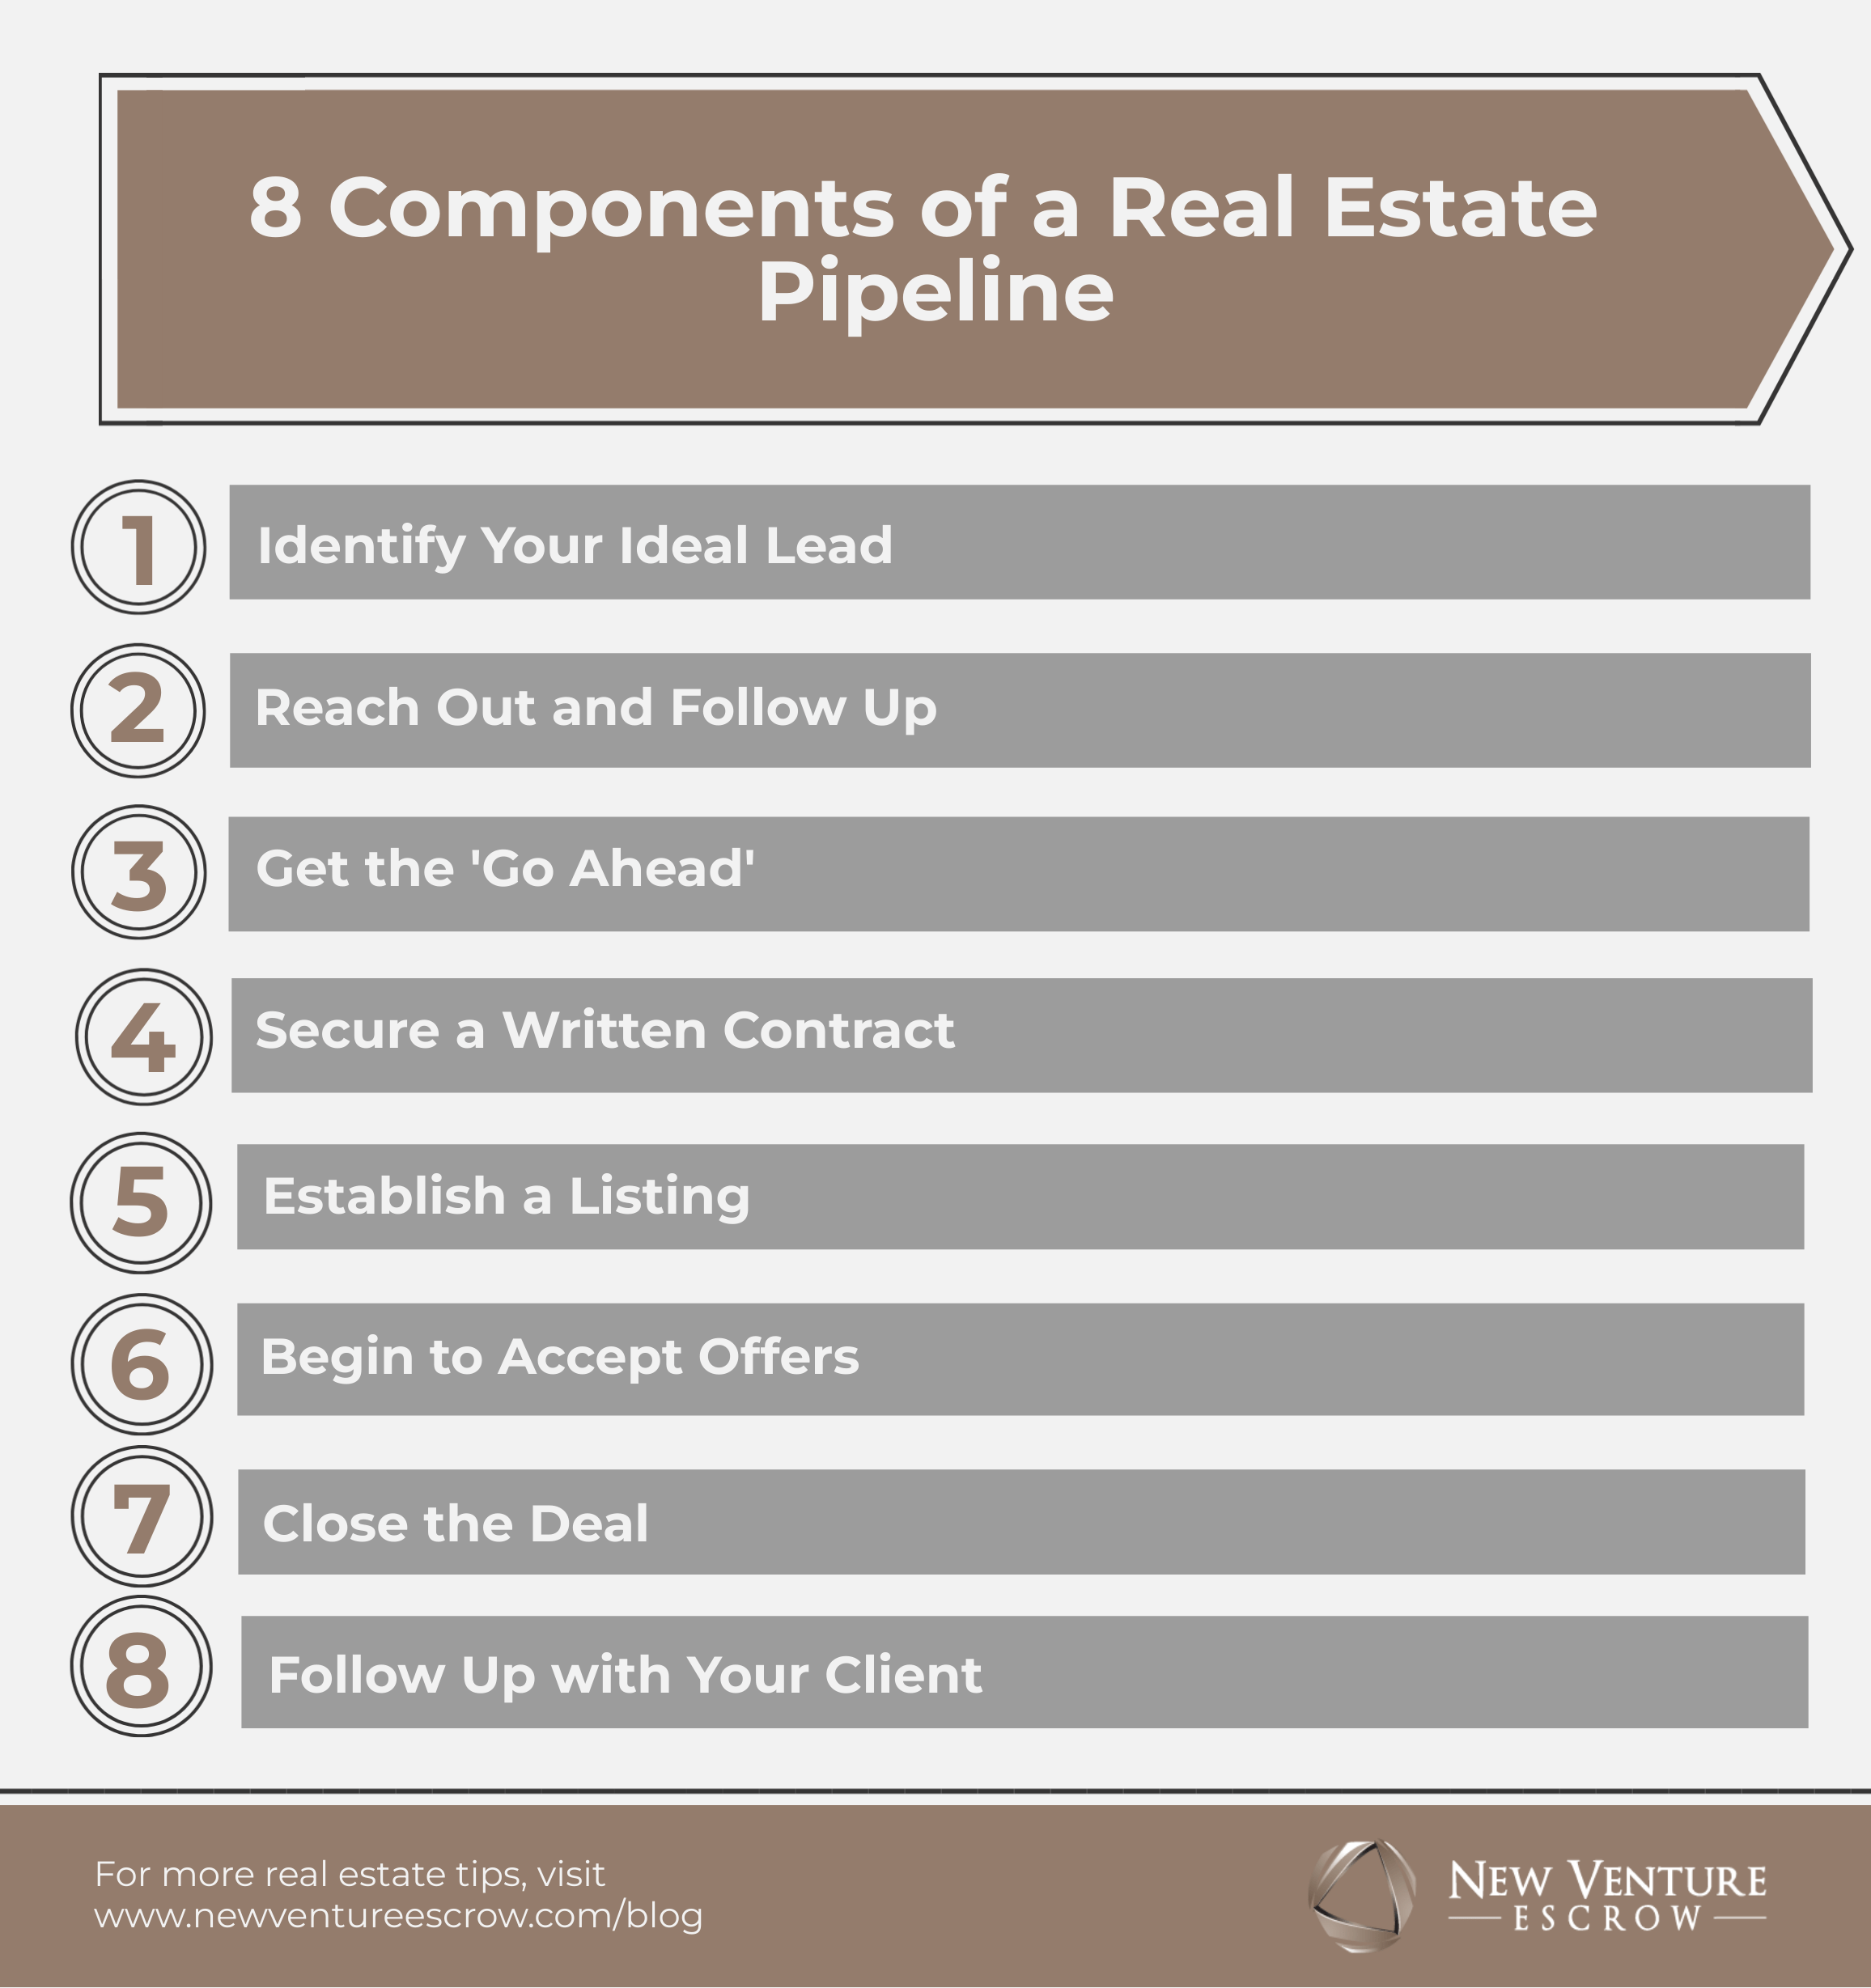 Real estate pipeline 8 components